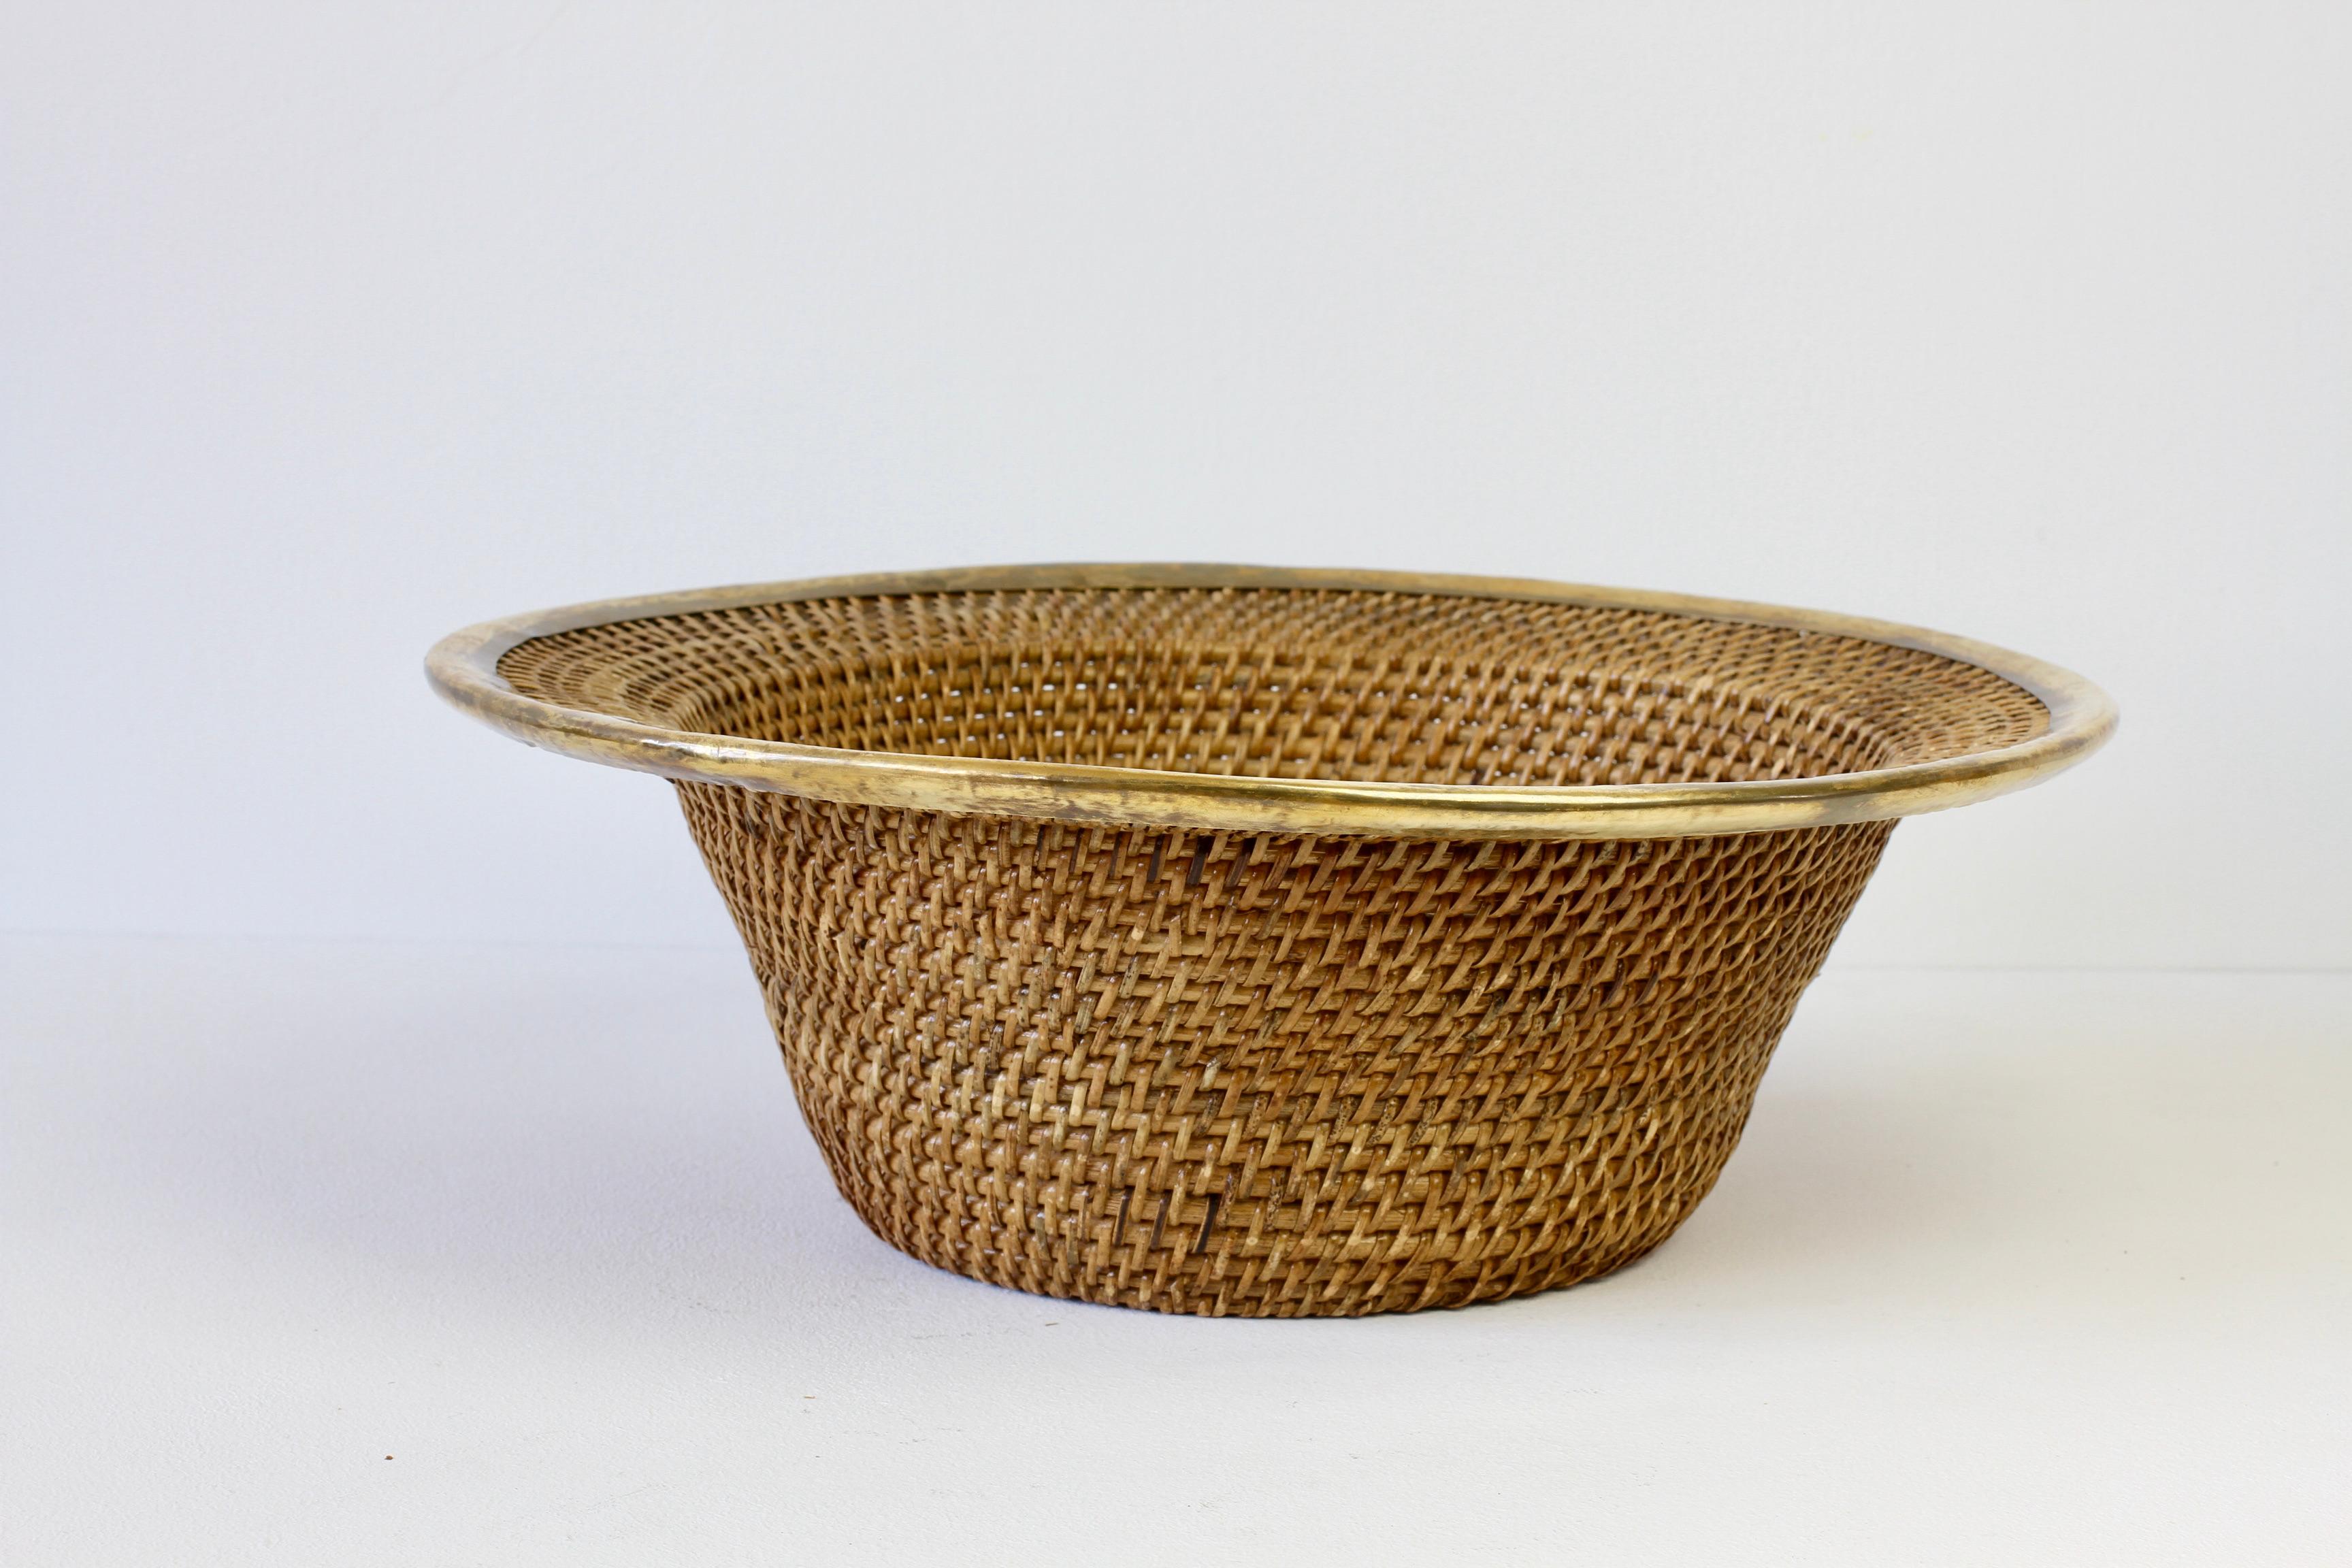 Hollywood Regency 1970s Large Vintage Italian Wicker, Rattan and Brass Bowl or Dish